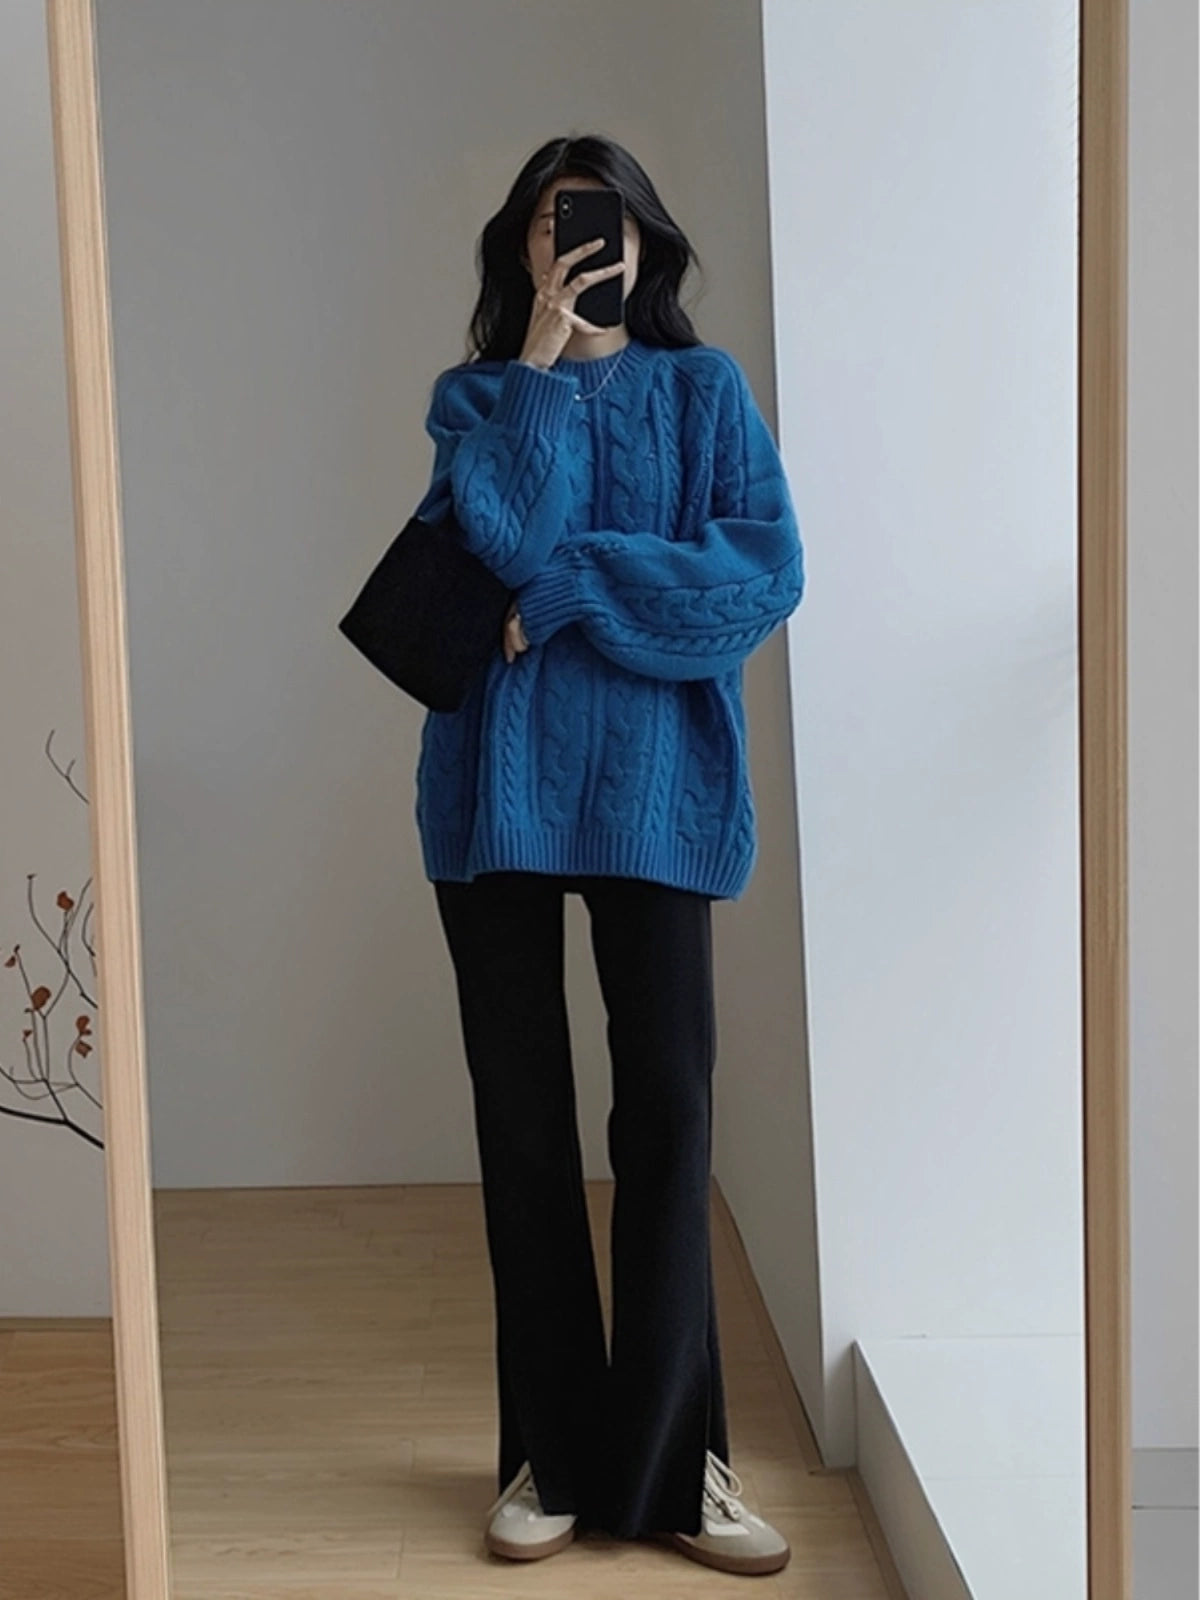 Korean Two-piece blue shirt and pants (Shipping not included)